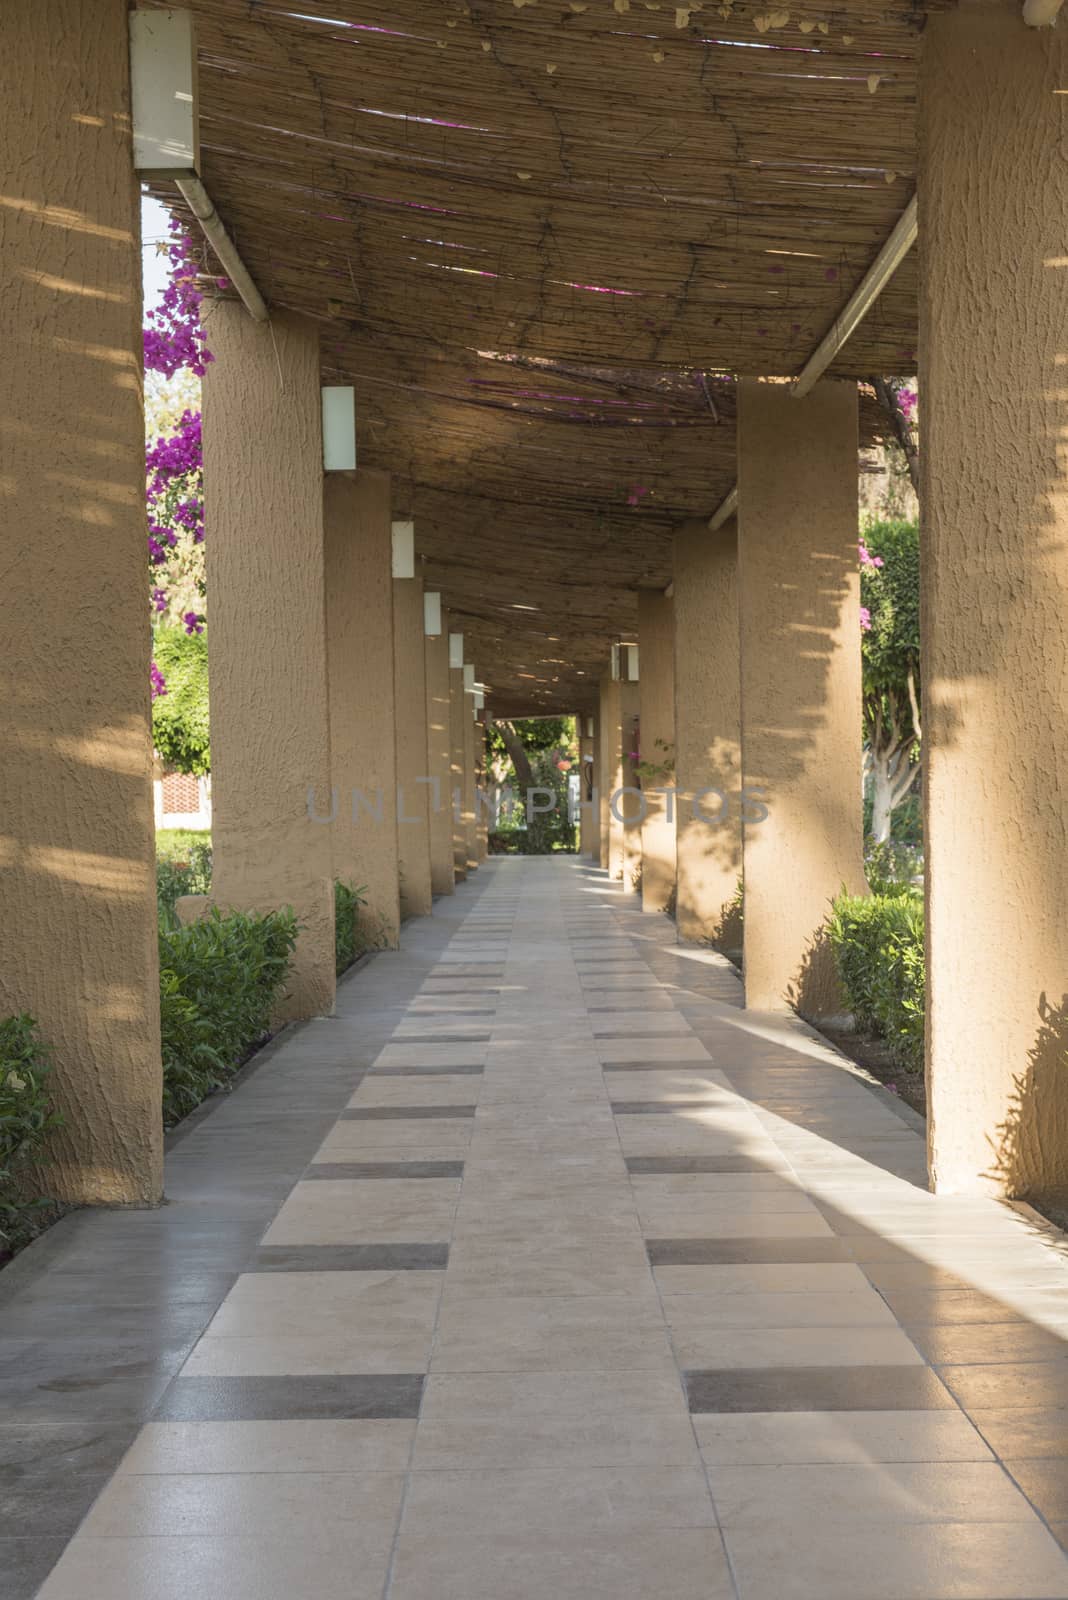 Covered tiled paved footpath pathway with stone columns in rural formal ornamental garden grounds